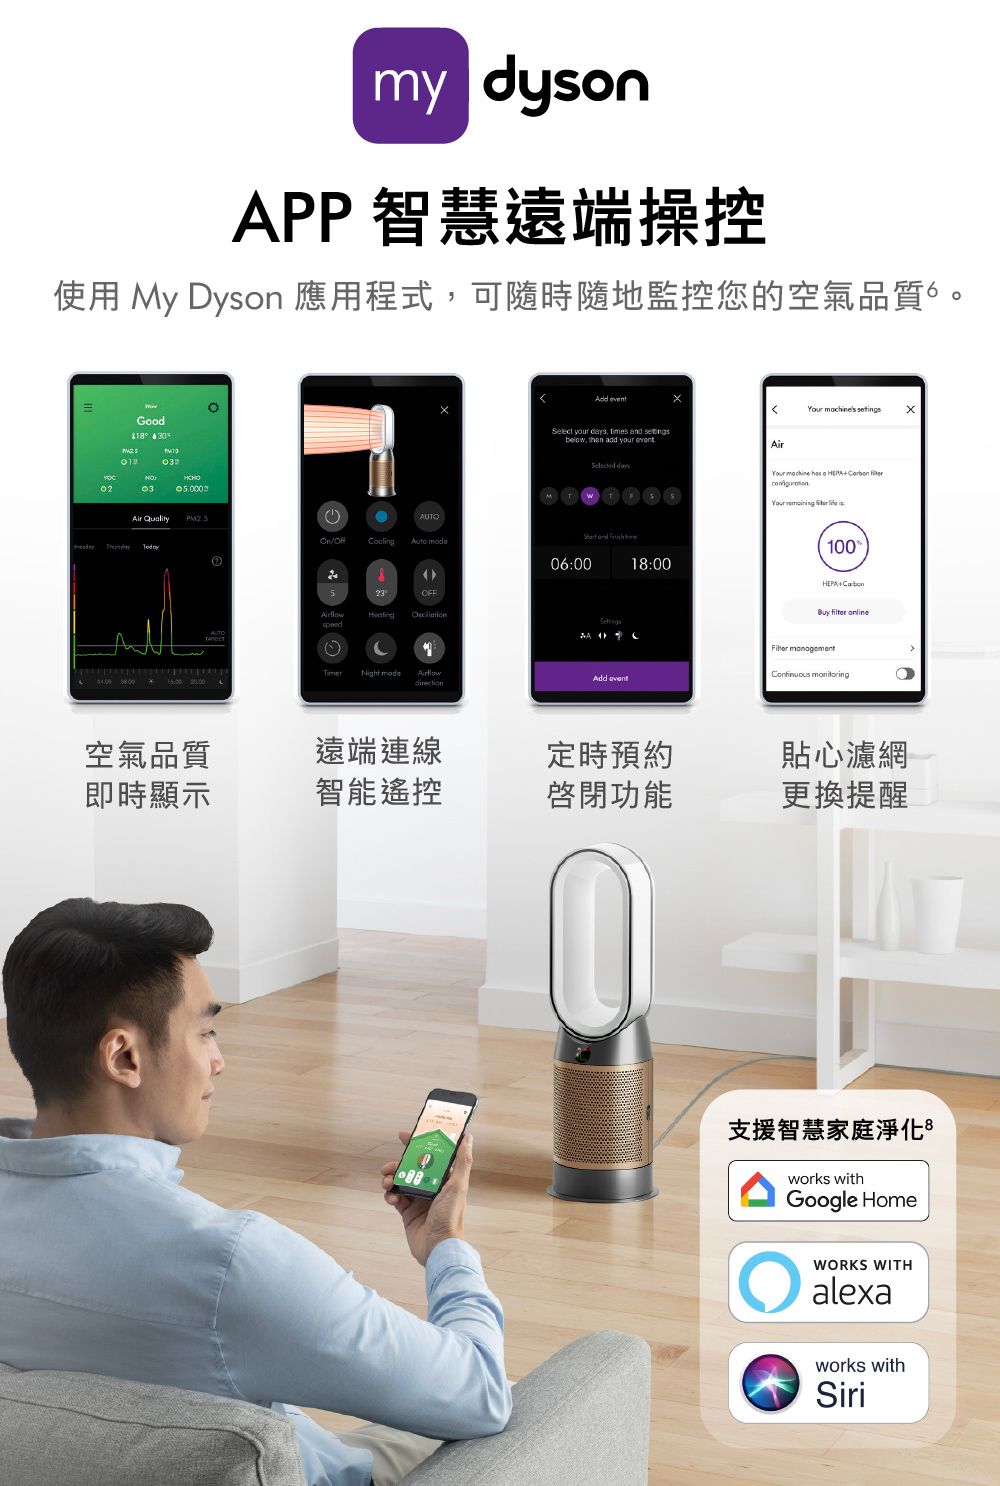 my dysonAPP zݾޱϥ My Dyson ε{iHHaʱzŮ~CGood8 30  your    , then dd your  daysNO03Air Quality1AUTO and  mode18:00speed  Timer mode 06:00  directionAdd  's Your machine  a HEPA  Your    100HEPA    Ů~軷ݳsuwɹwKoYܴ໻ҳ\󴫴䴩zaxbworks withGoogle HomeWORKS WITHalexaworks withSiri